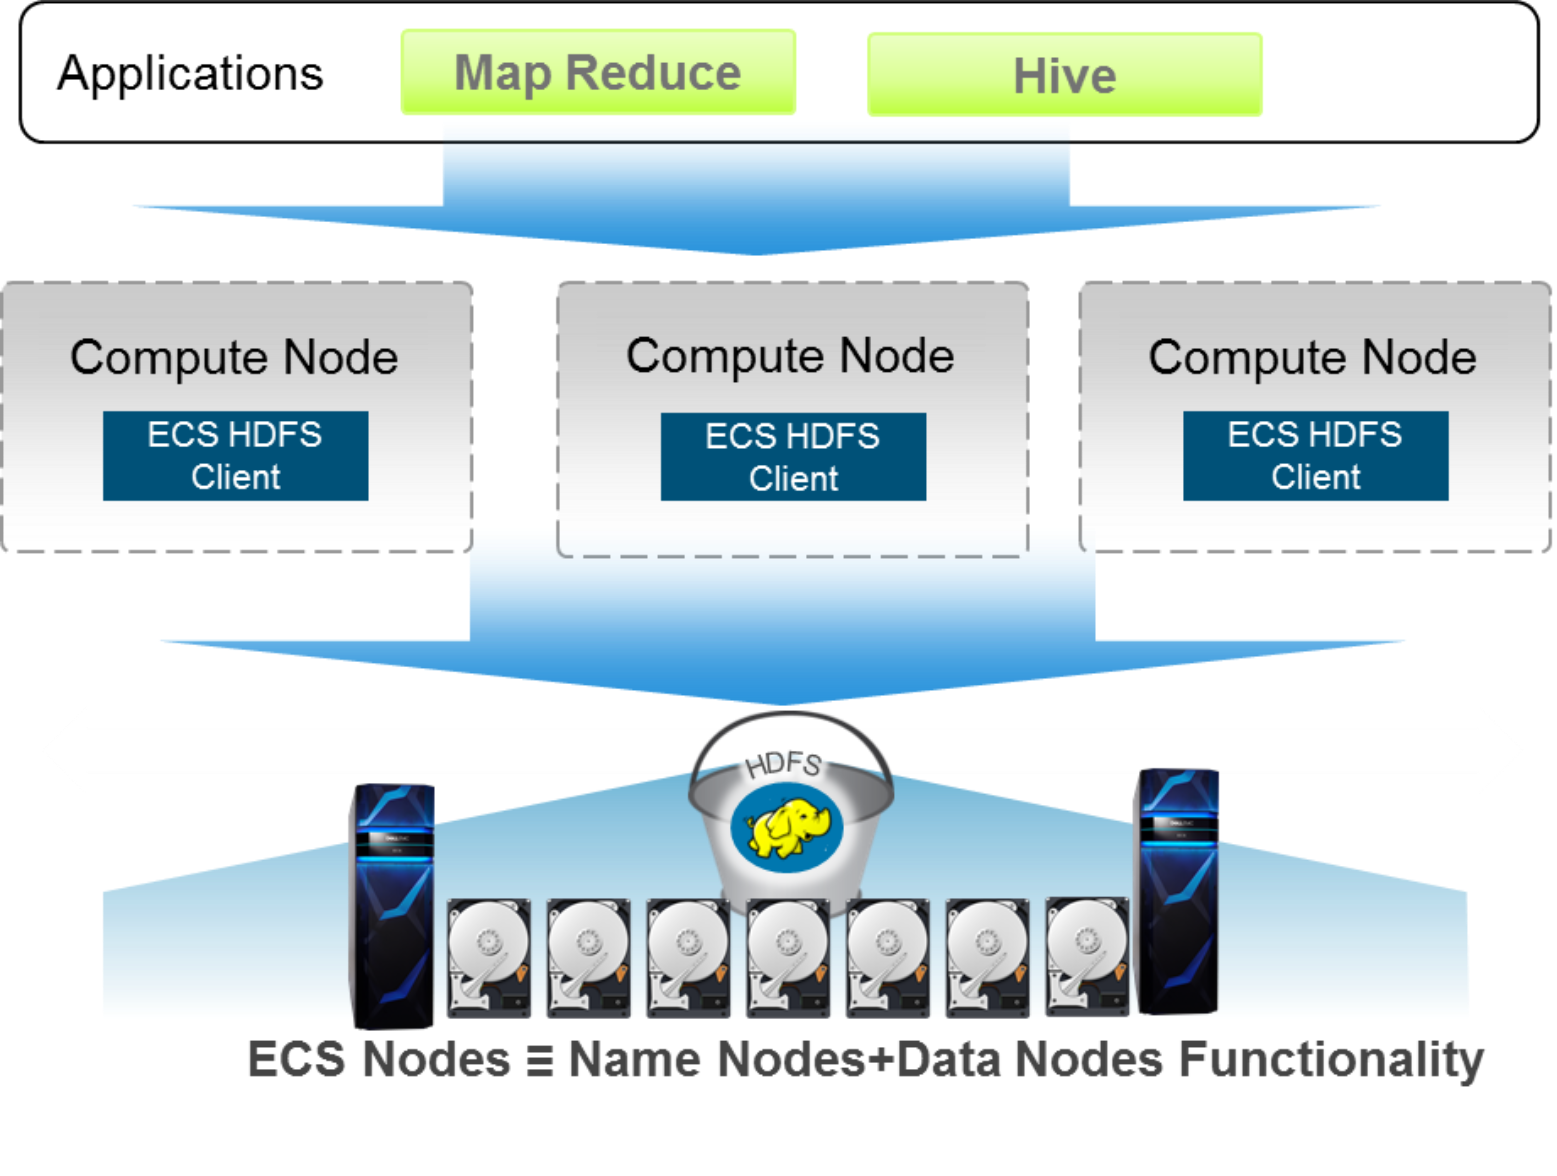 Application layer on top with Map Reduce and Hive jobs pointing to Hadoop compute nodes.  Each compute node running an ECS jar file that allows ECS to be used as Hadoop file system.  The compute nodes point to an ECS to show Name and Data node functionality. 